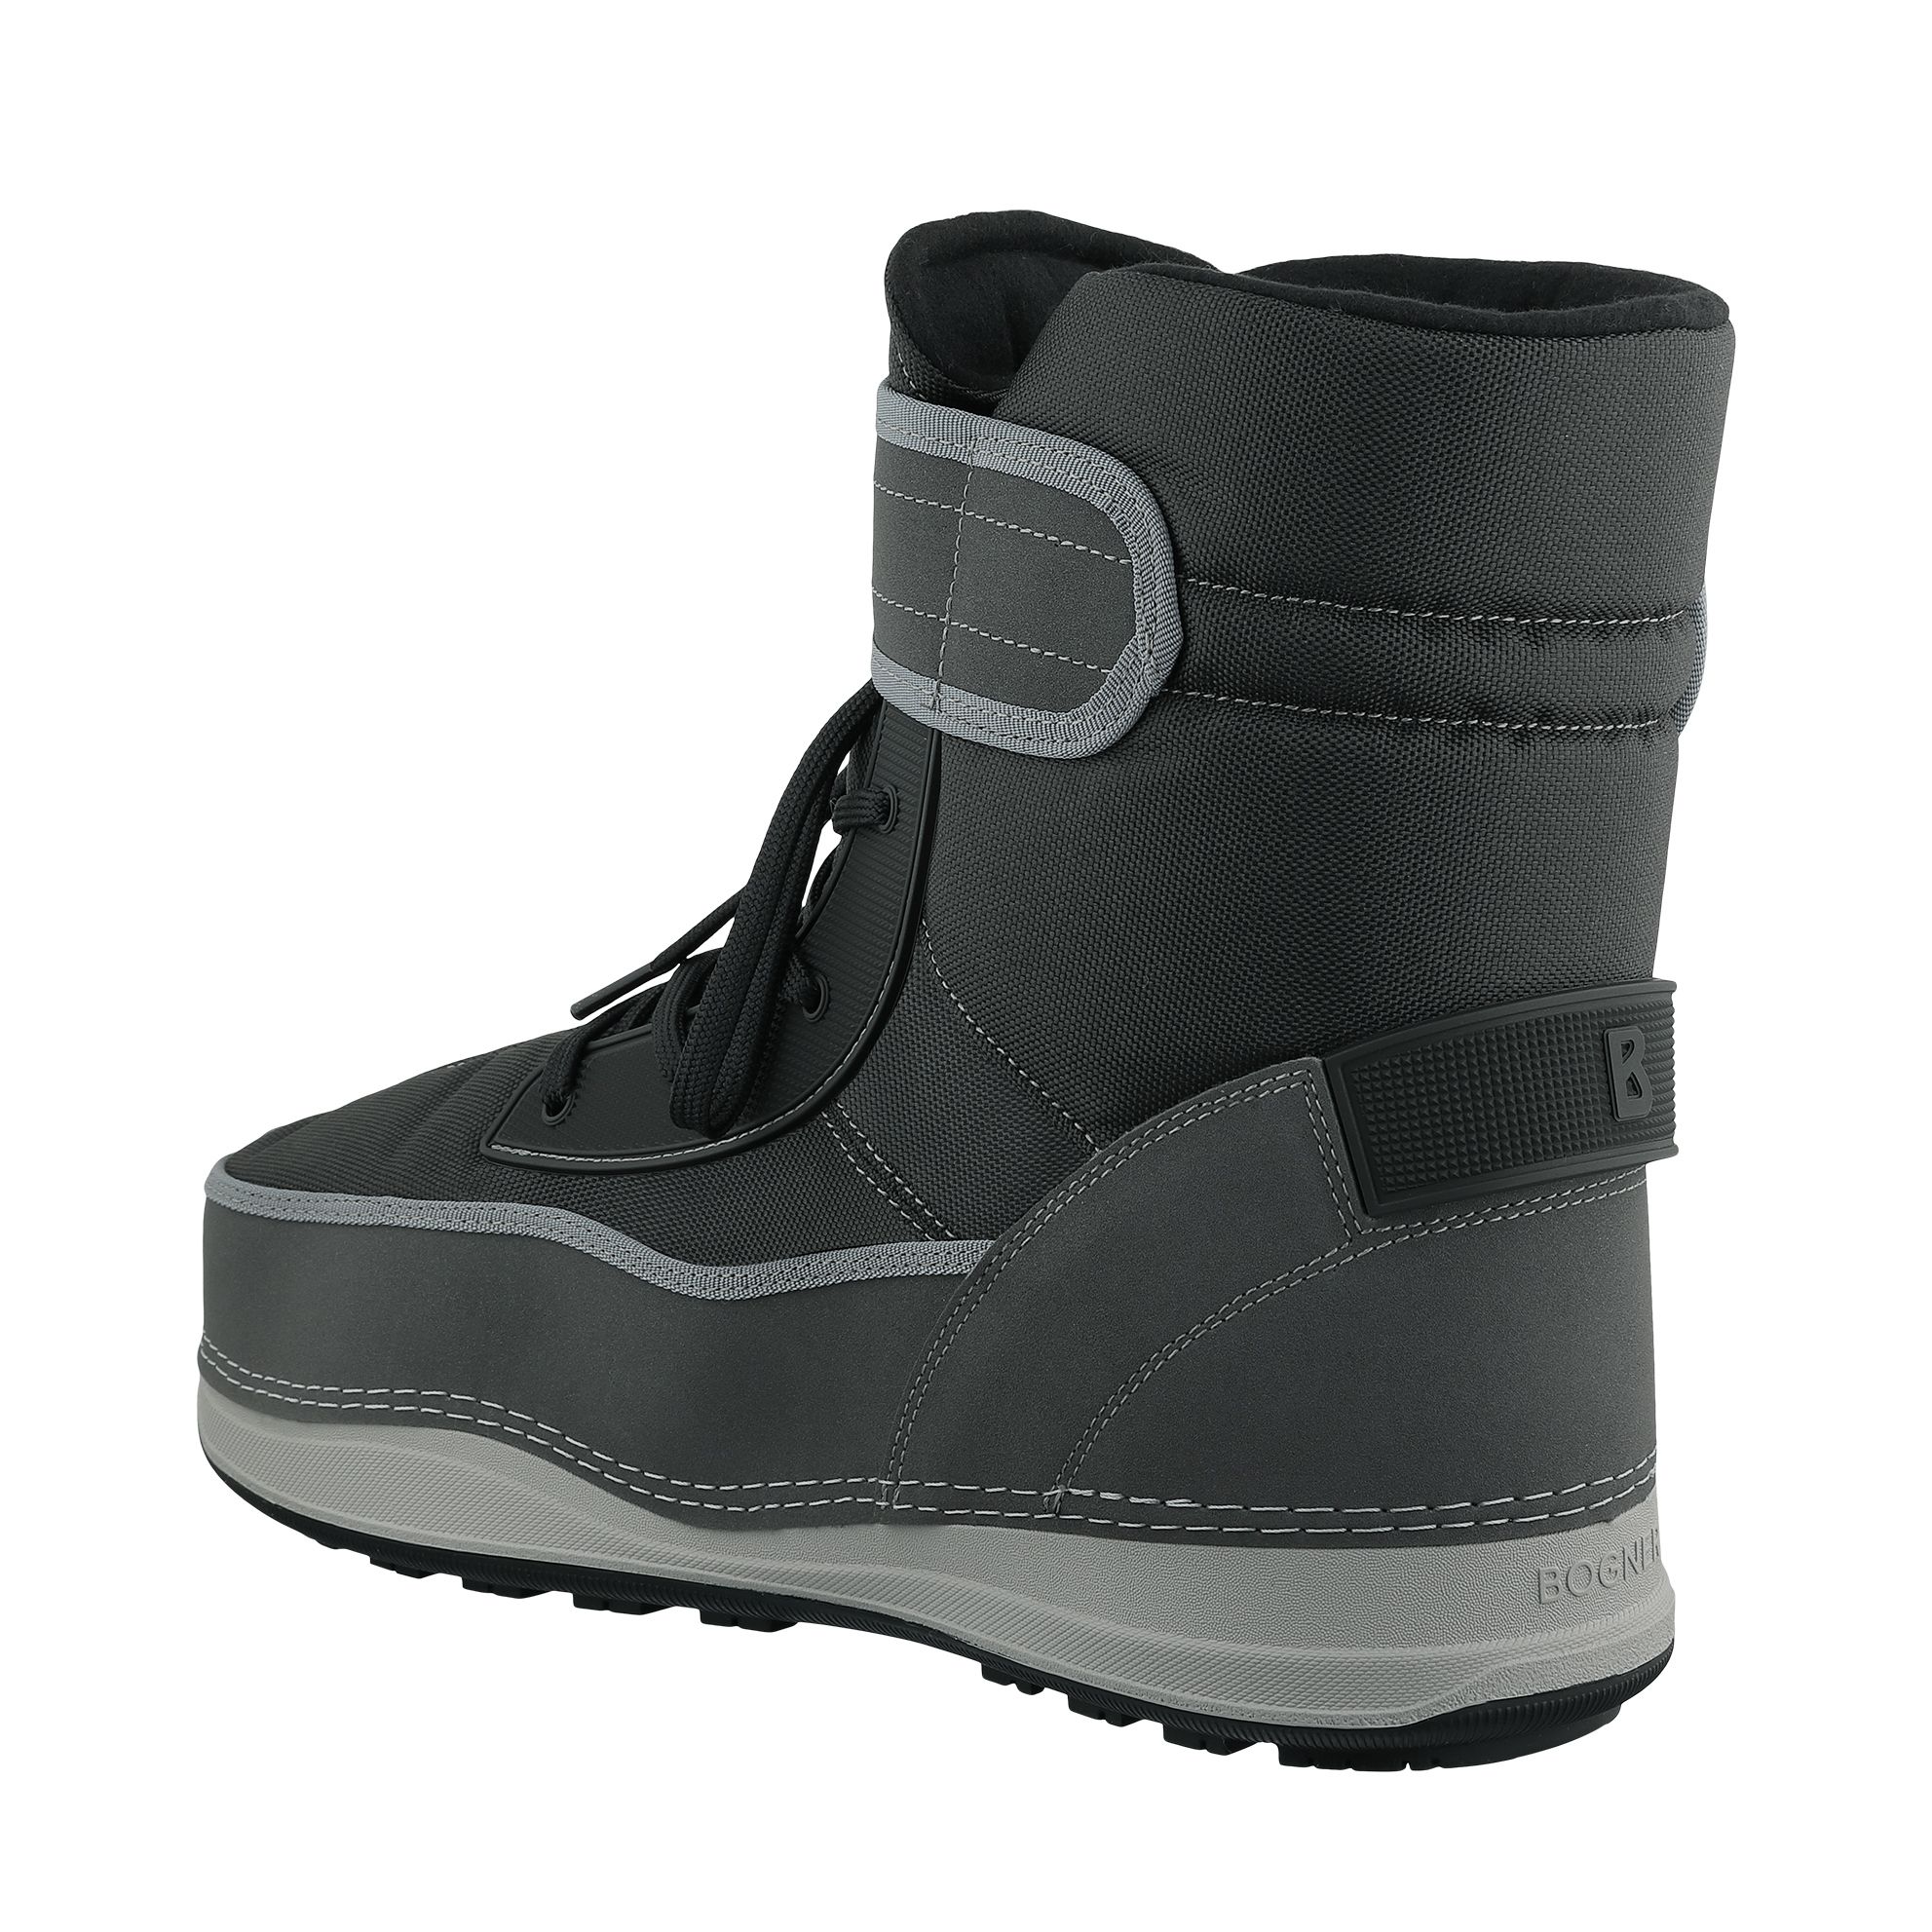 Winter Shoes -  bogner Laax 1A Snow Boots